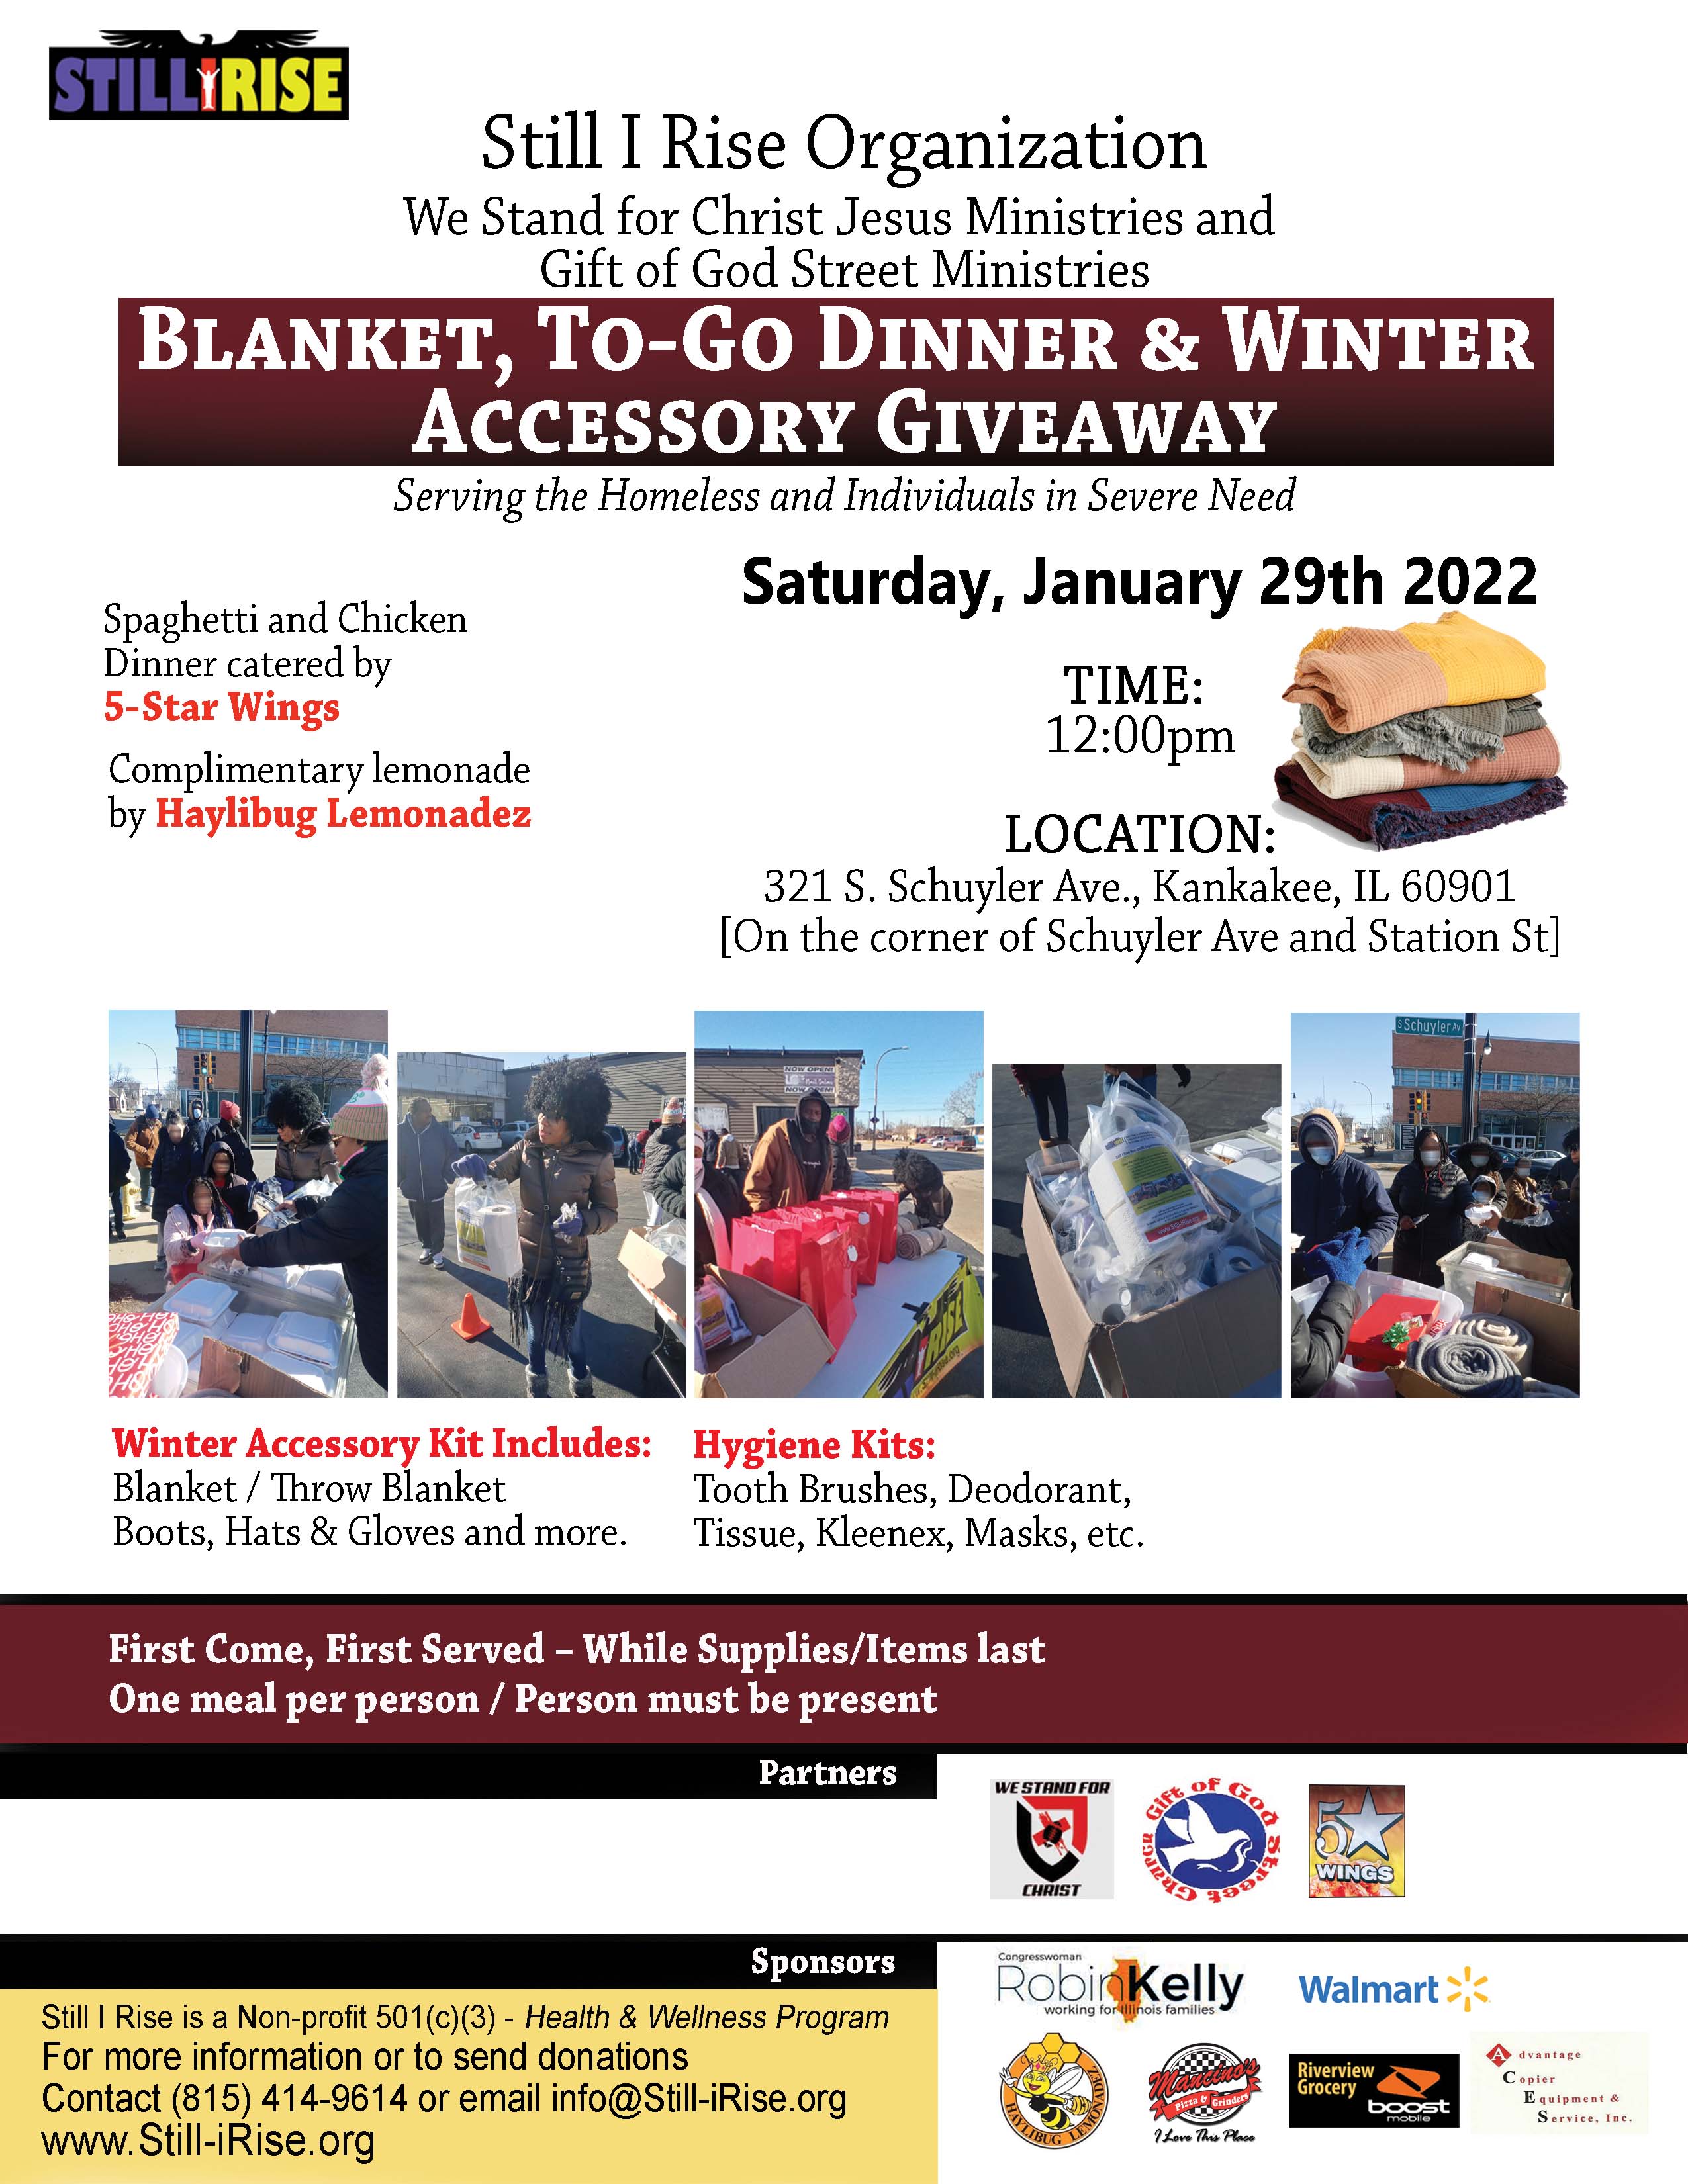 Blanket, To-Go Dinner & Winter Accessory Giveaway